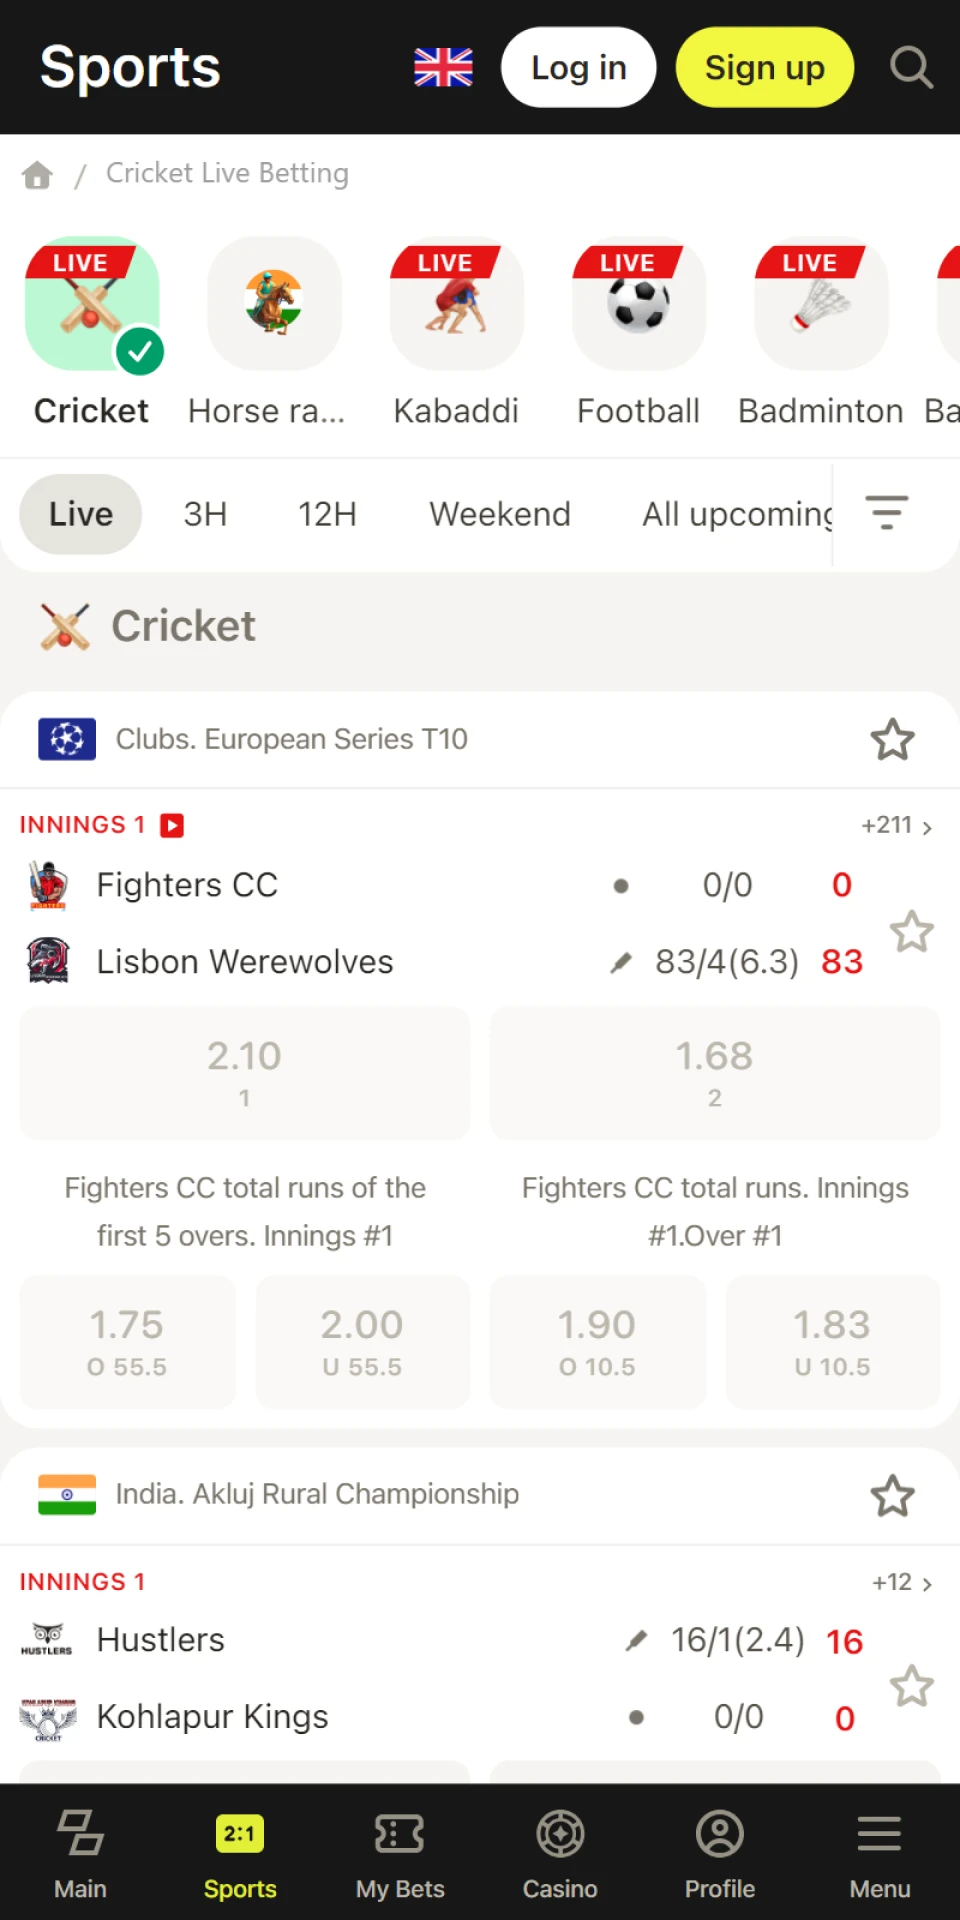 Place your bets on your favorite sports team using the Parimatch mobile app.